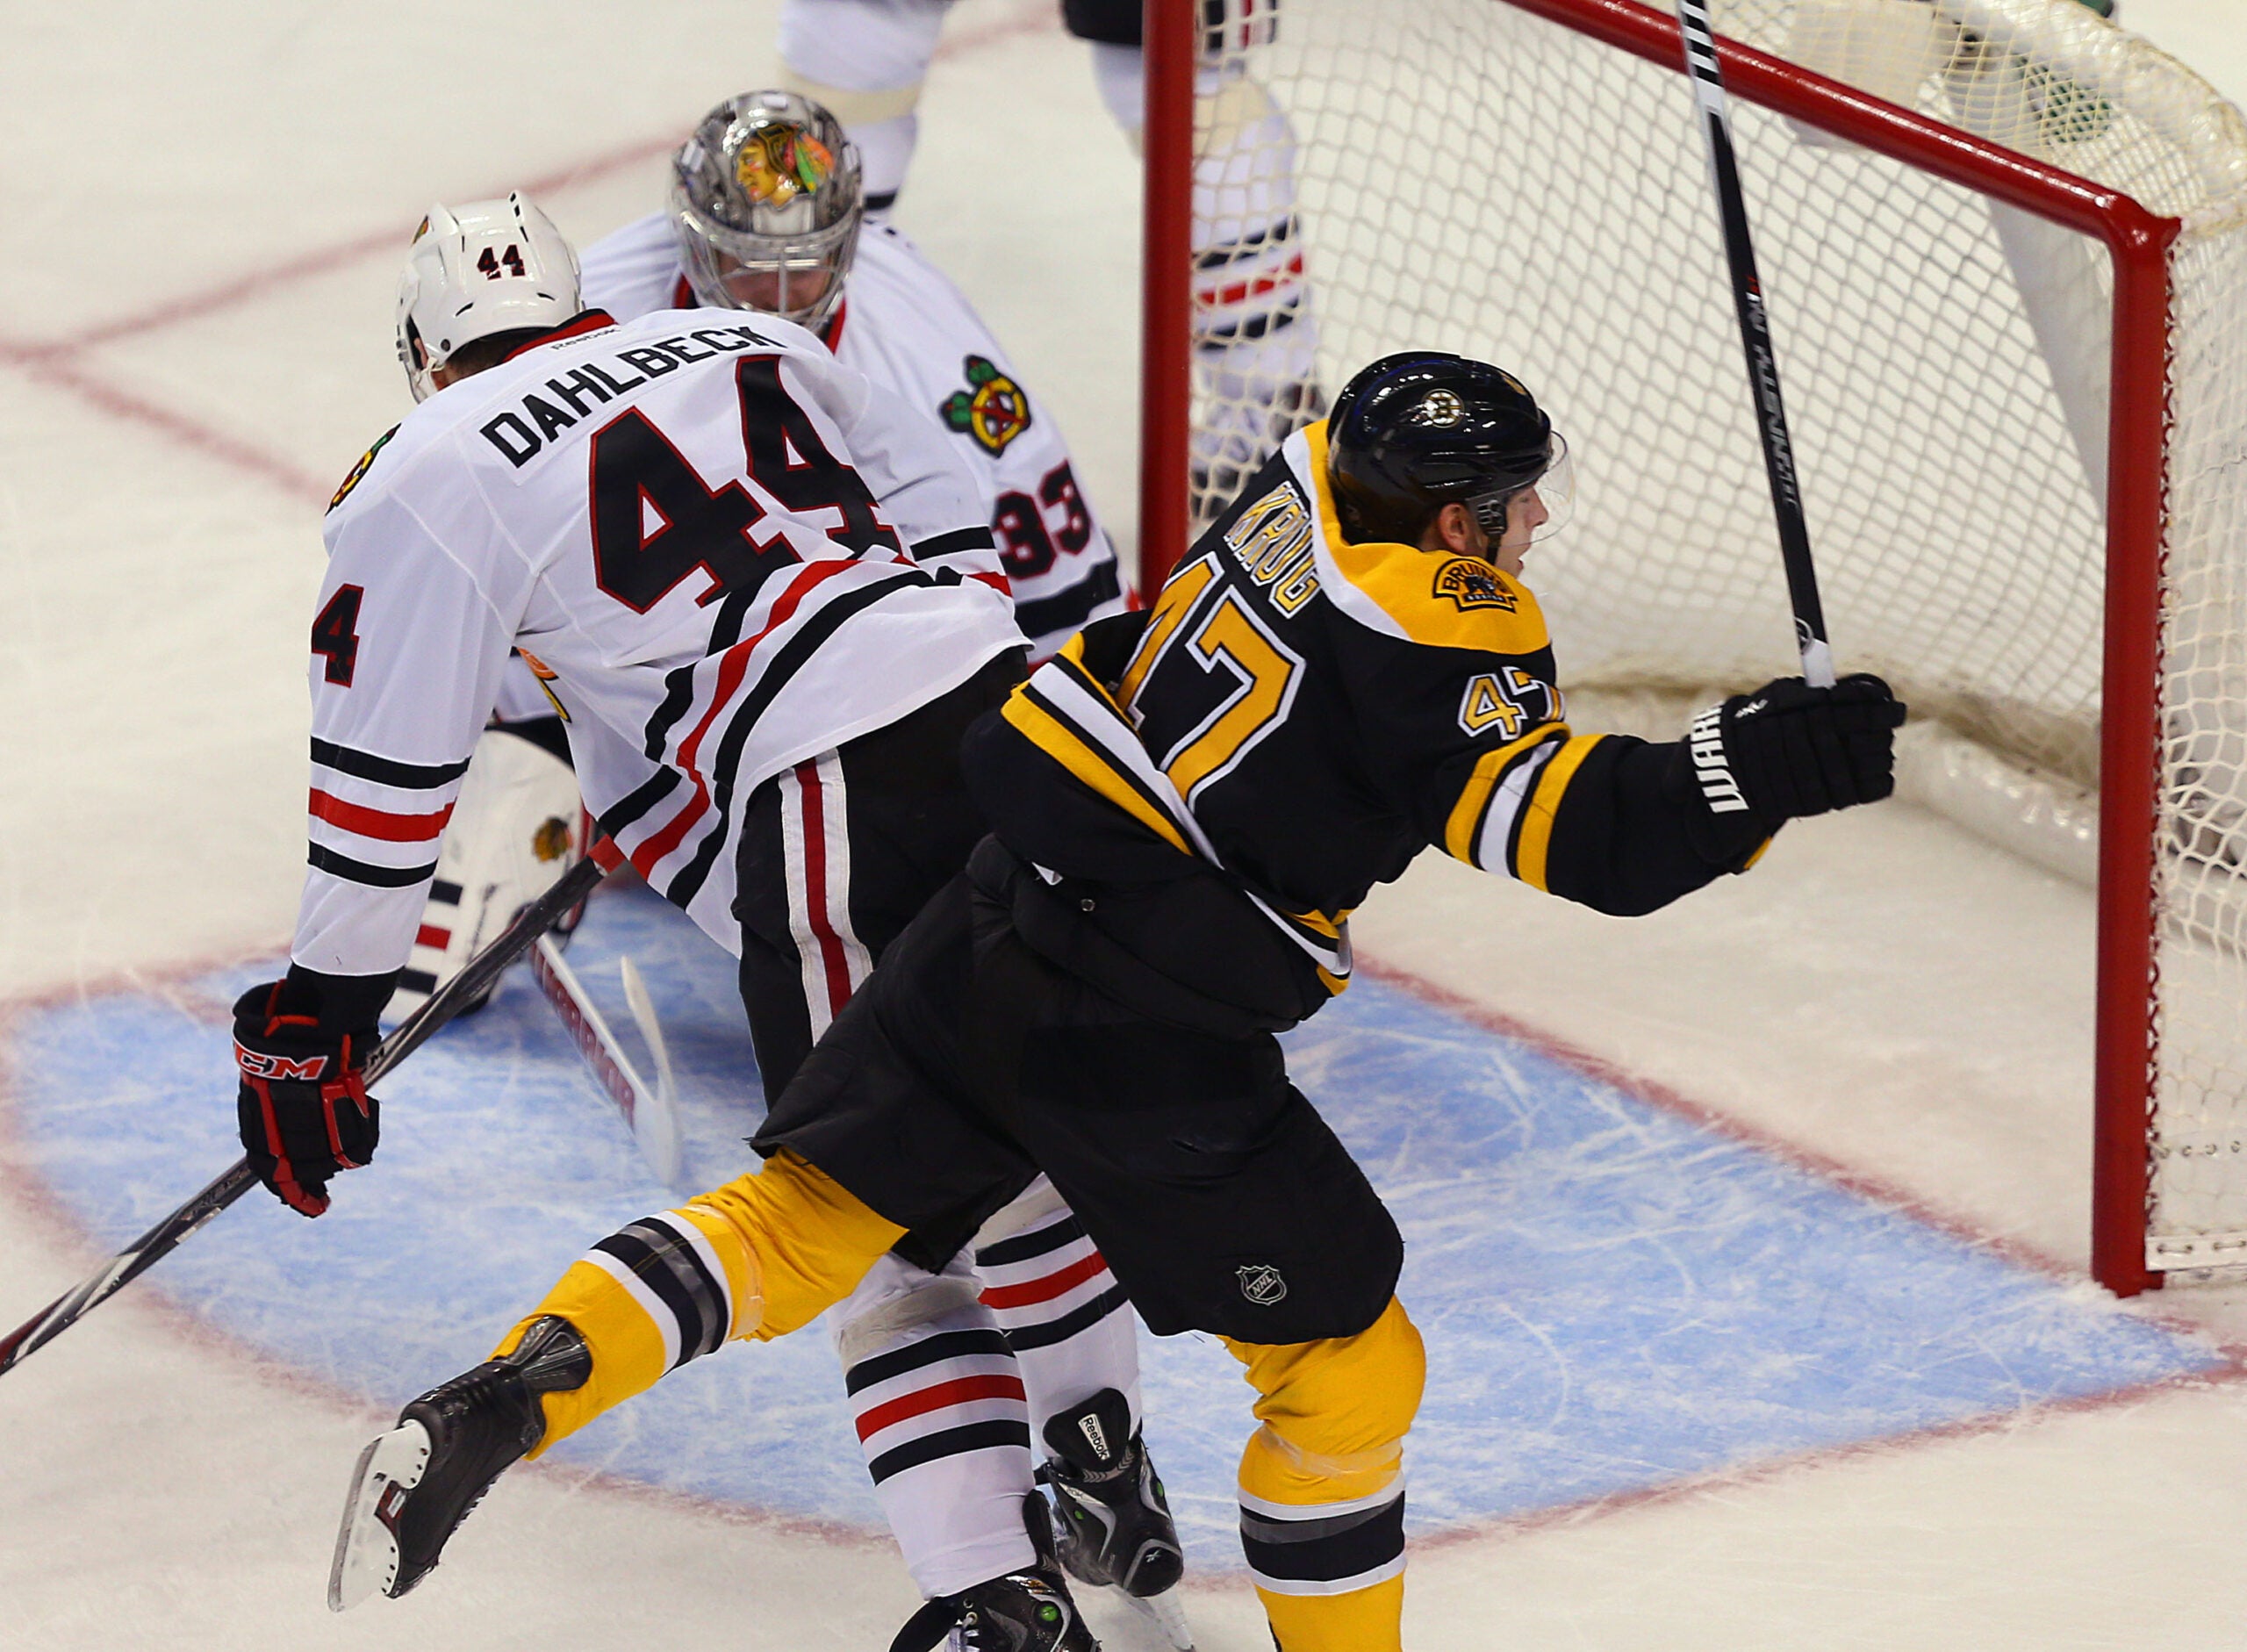 Boston Bruins 3-2 Loss to the Chicago Blackhawks in GIFs